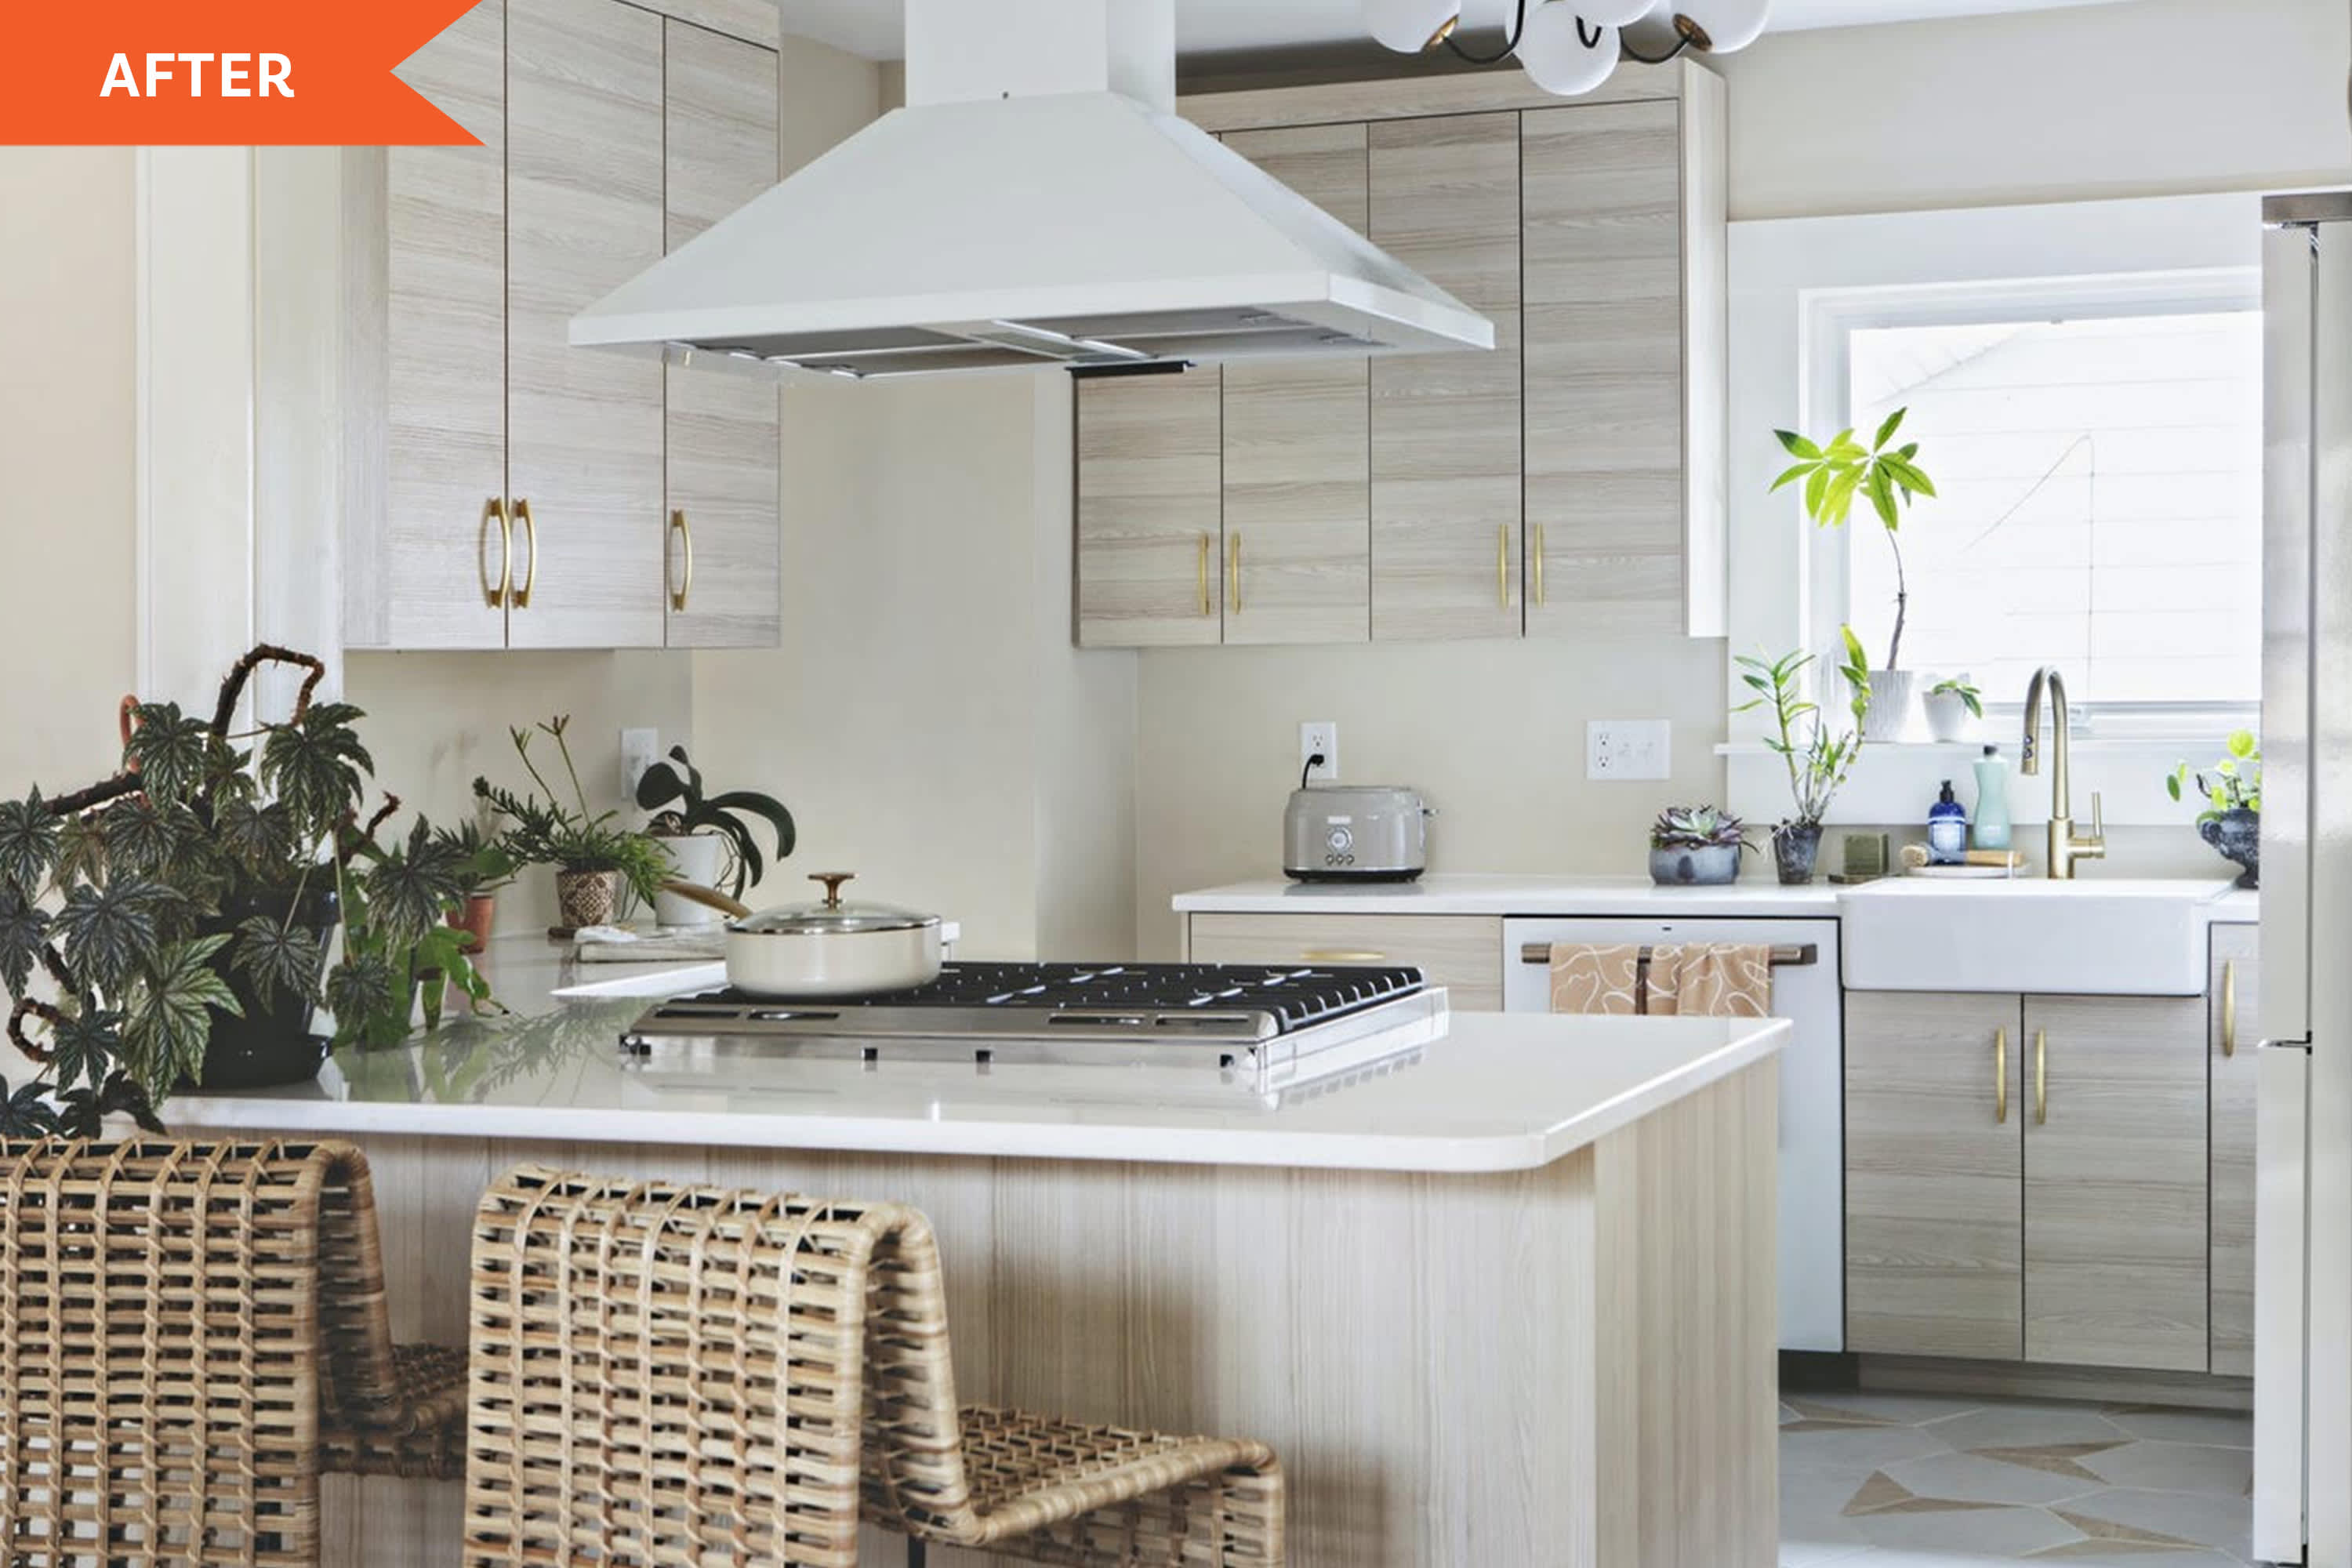 27 Renter-Friendly DIY Kitchen Makeovers on a Budget